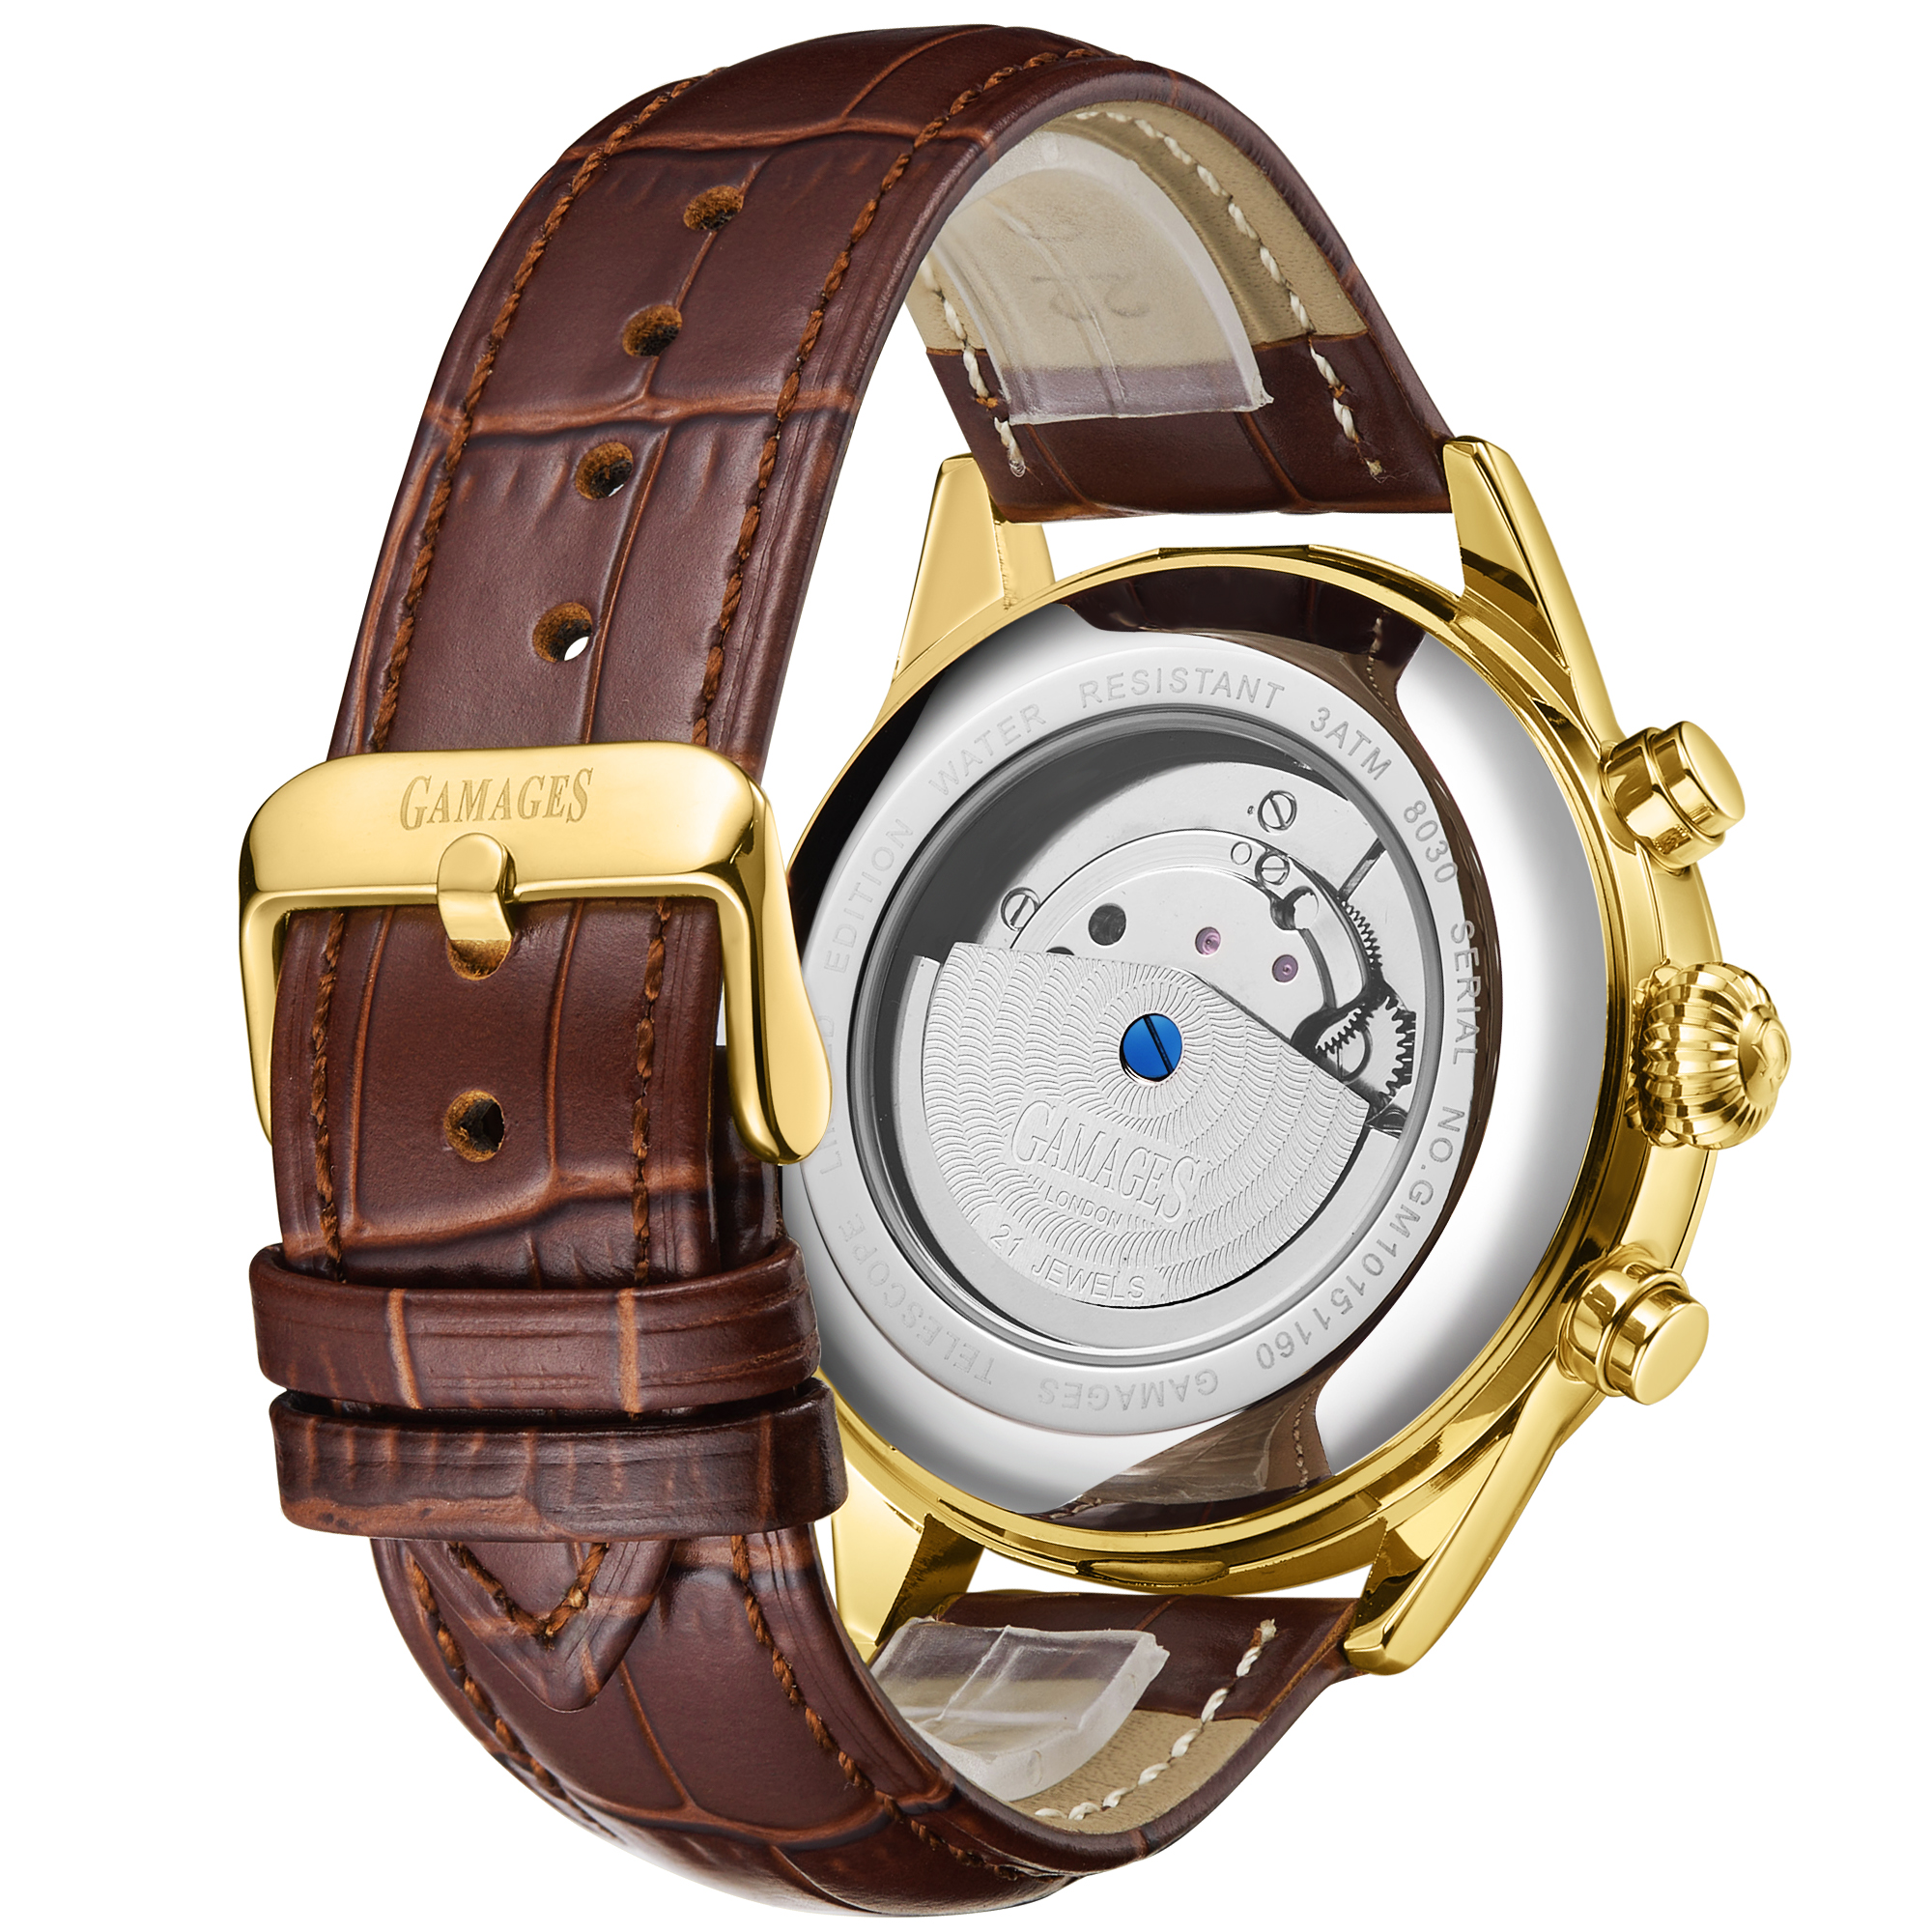 Gamages of London Hand Assembled Telescope Automatic Gold Cherry- 5 Year Warranty and Free Delive... - Image 5 of 5